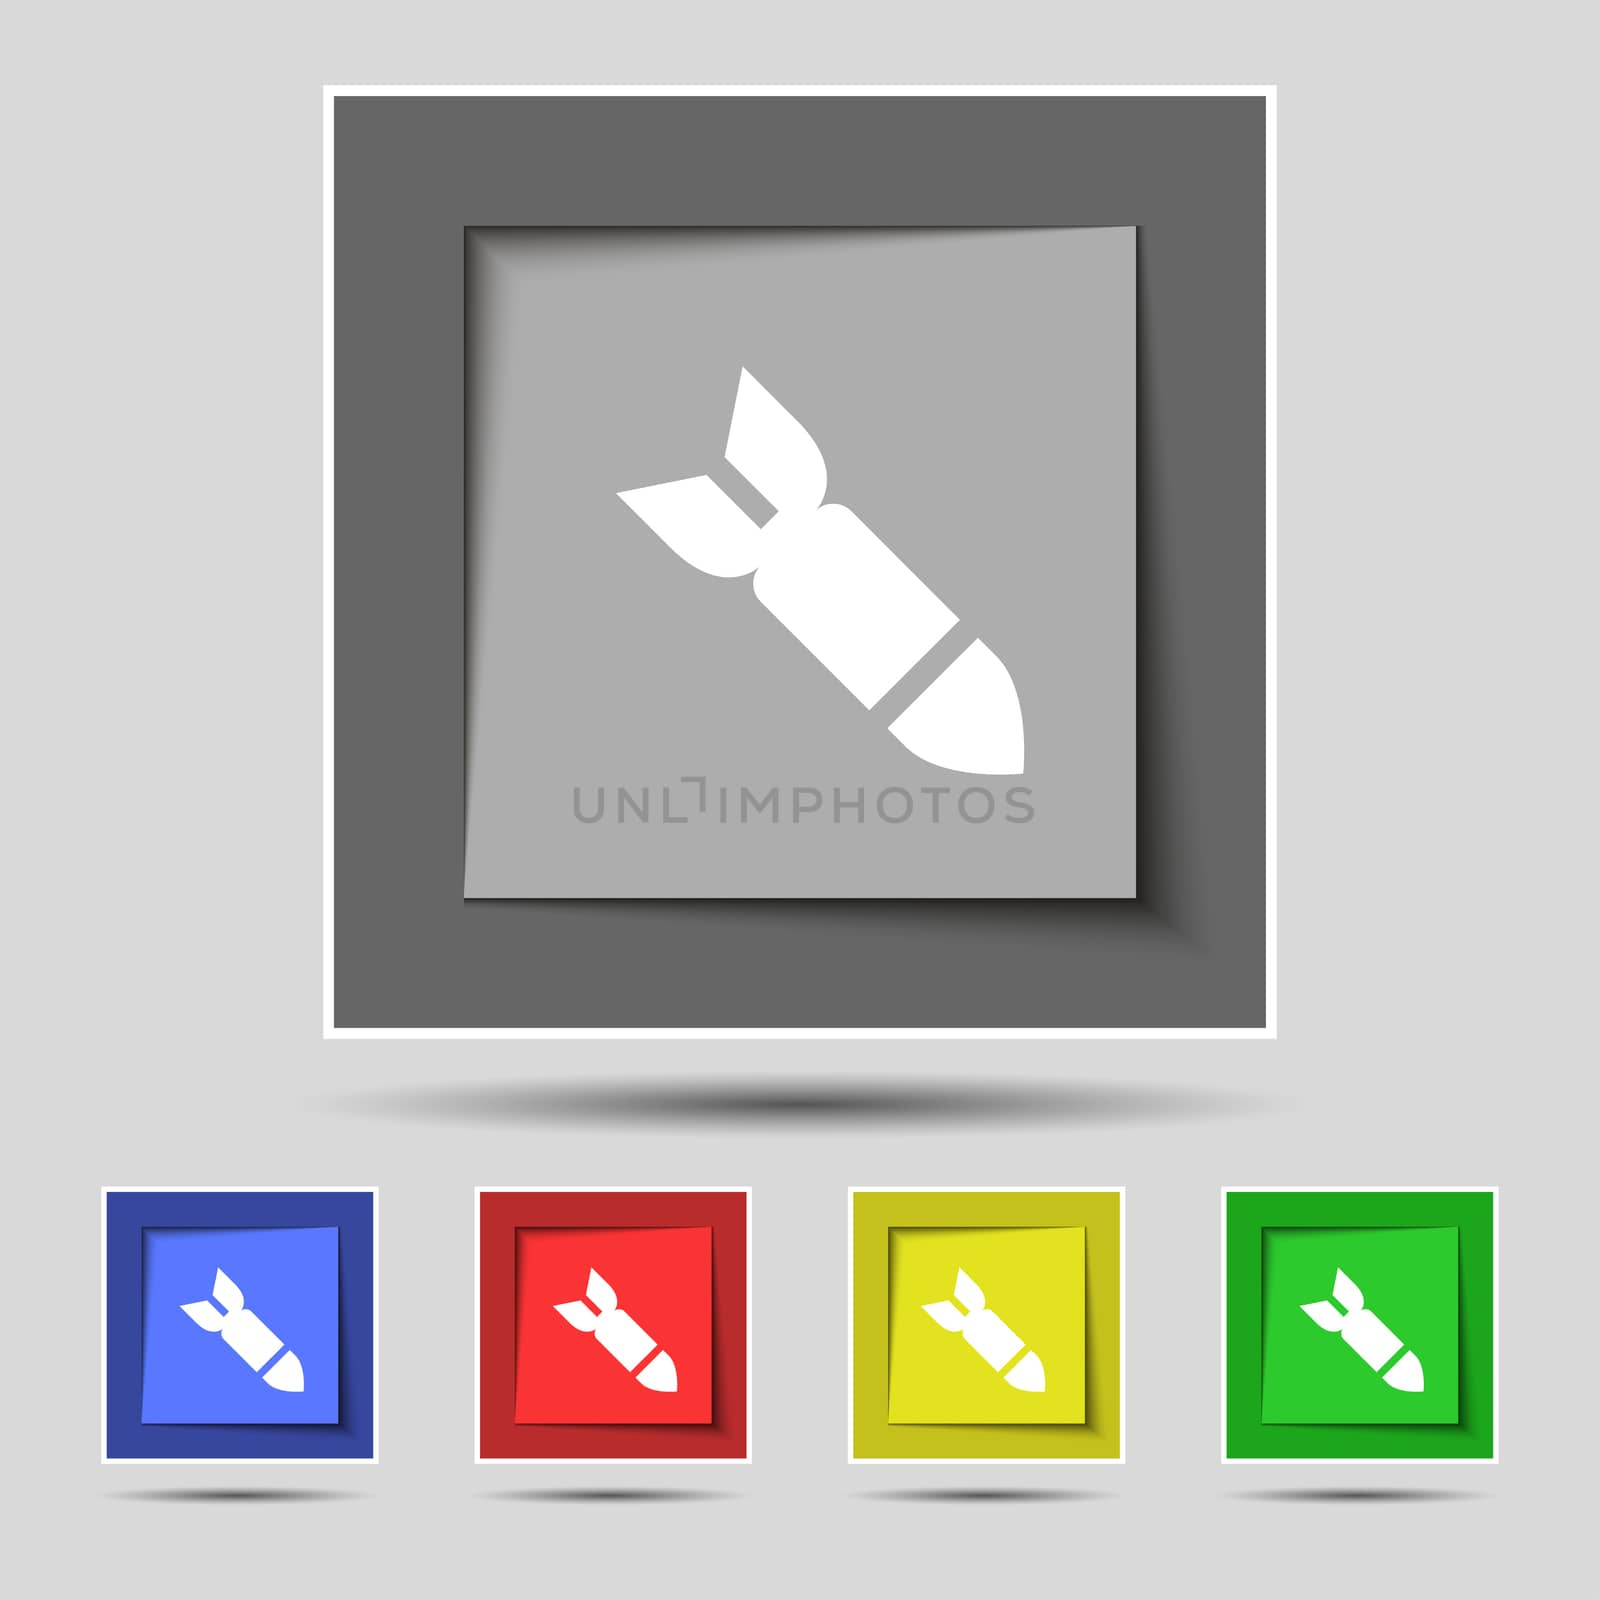 Missile,Rocket weapon icon sign on the original five colored buttons.  by serhii_lohvyniuk